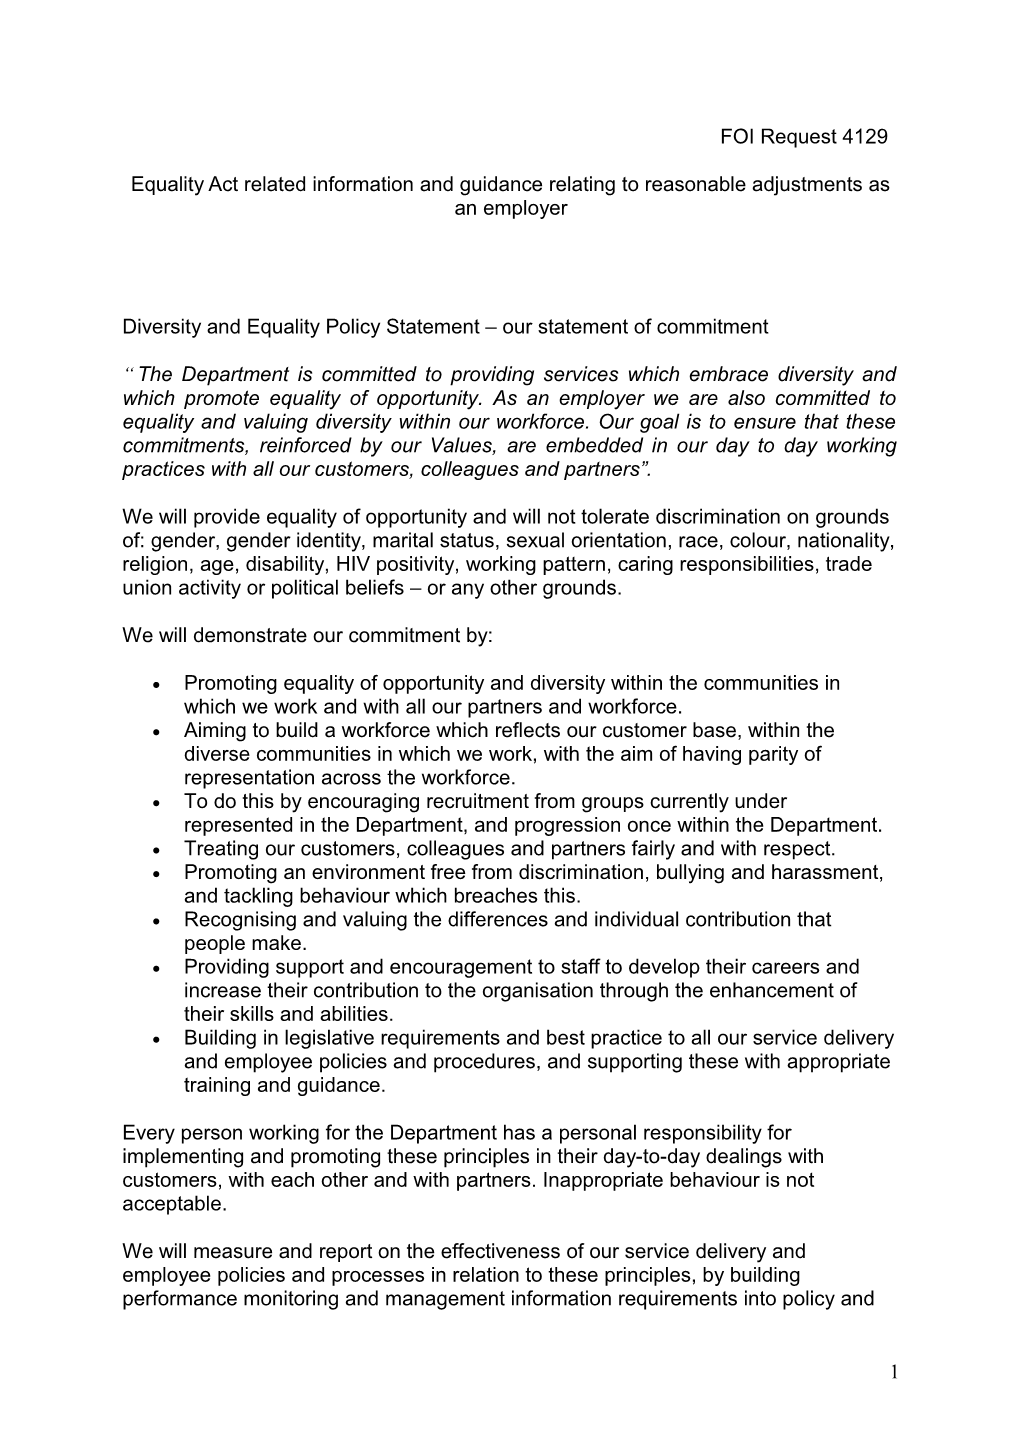 Diversity And Equality Policy Statement – Our Statement Of Commitment